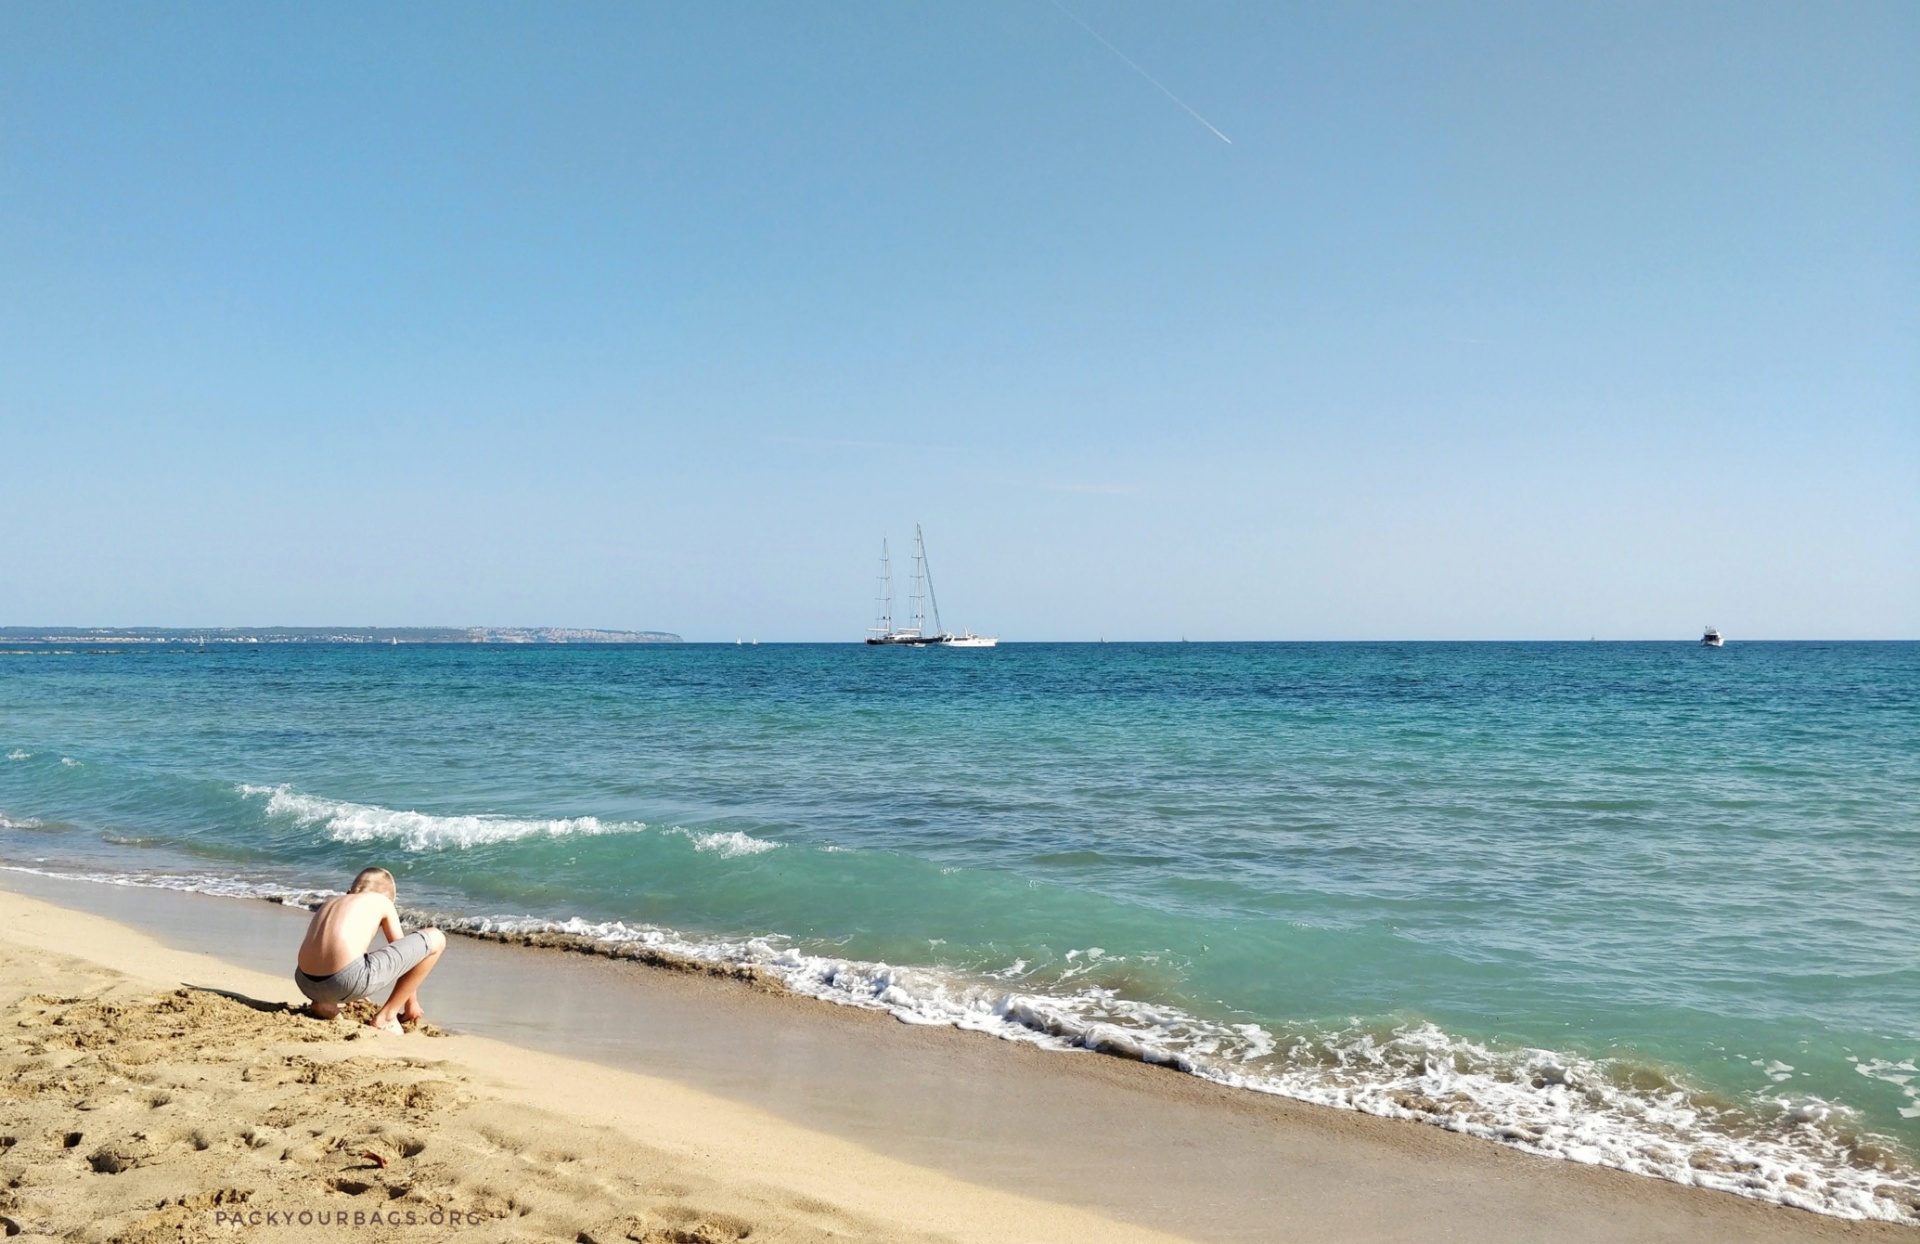 Five Great Mallorca Beaches You Should Visit - pack your bags